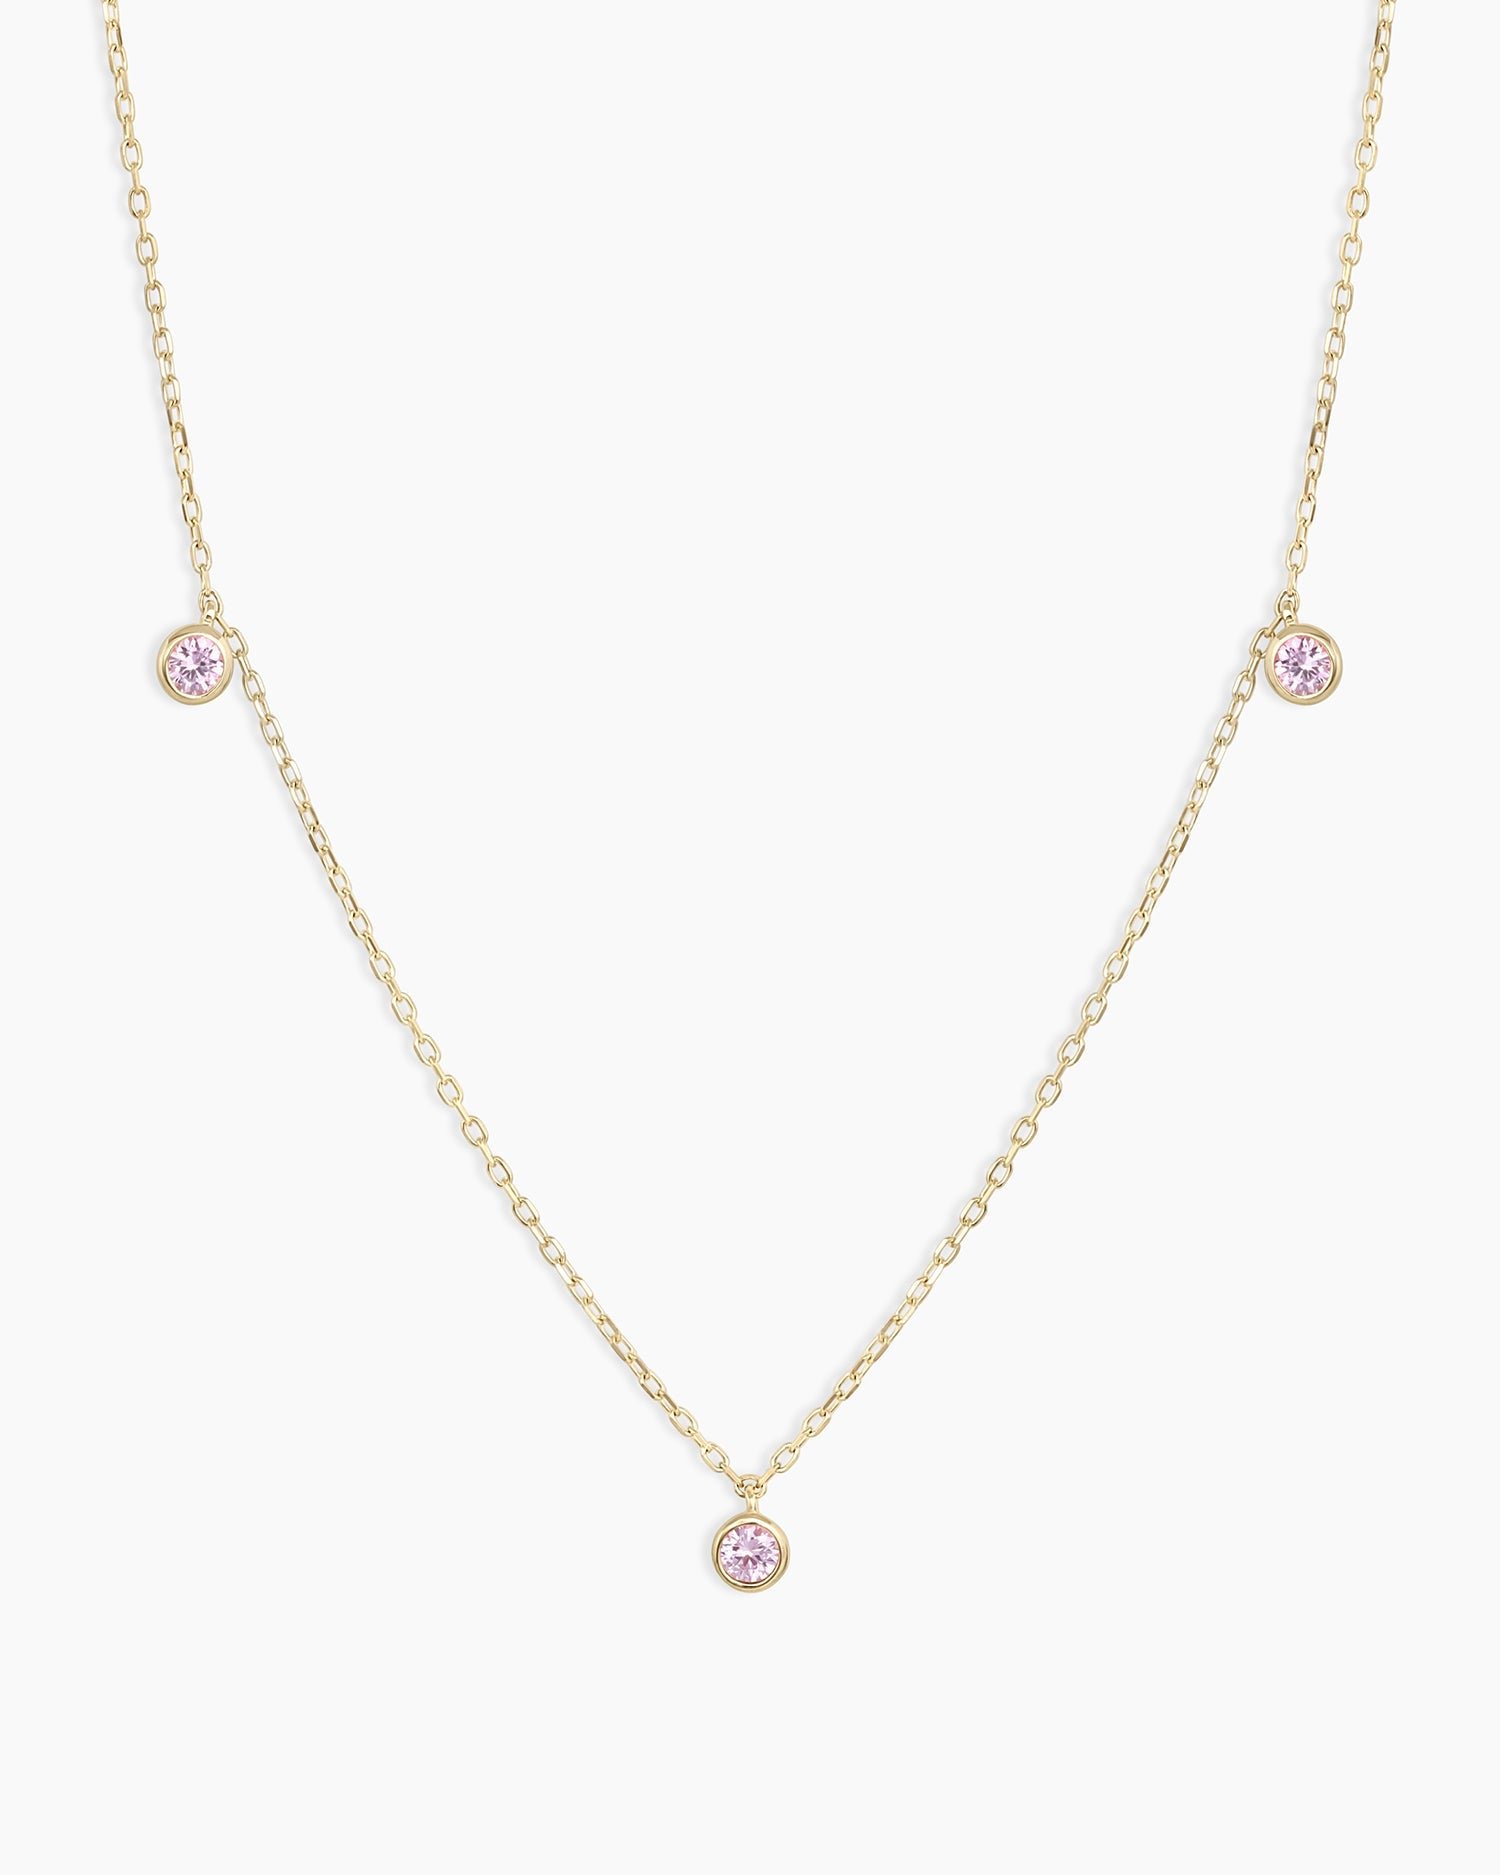 Buy Pink Sapphire Necklaces Personalised for You